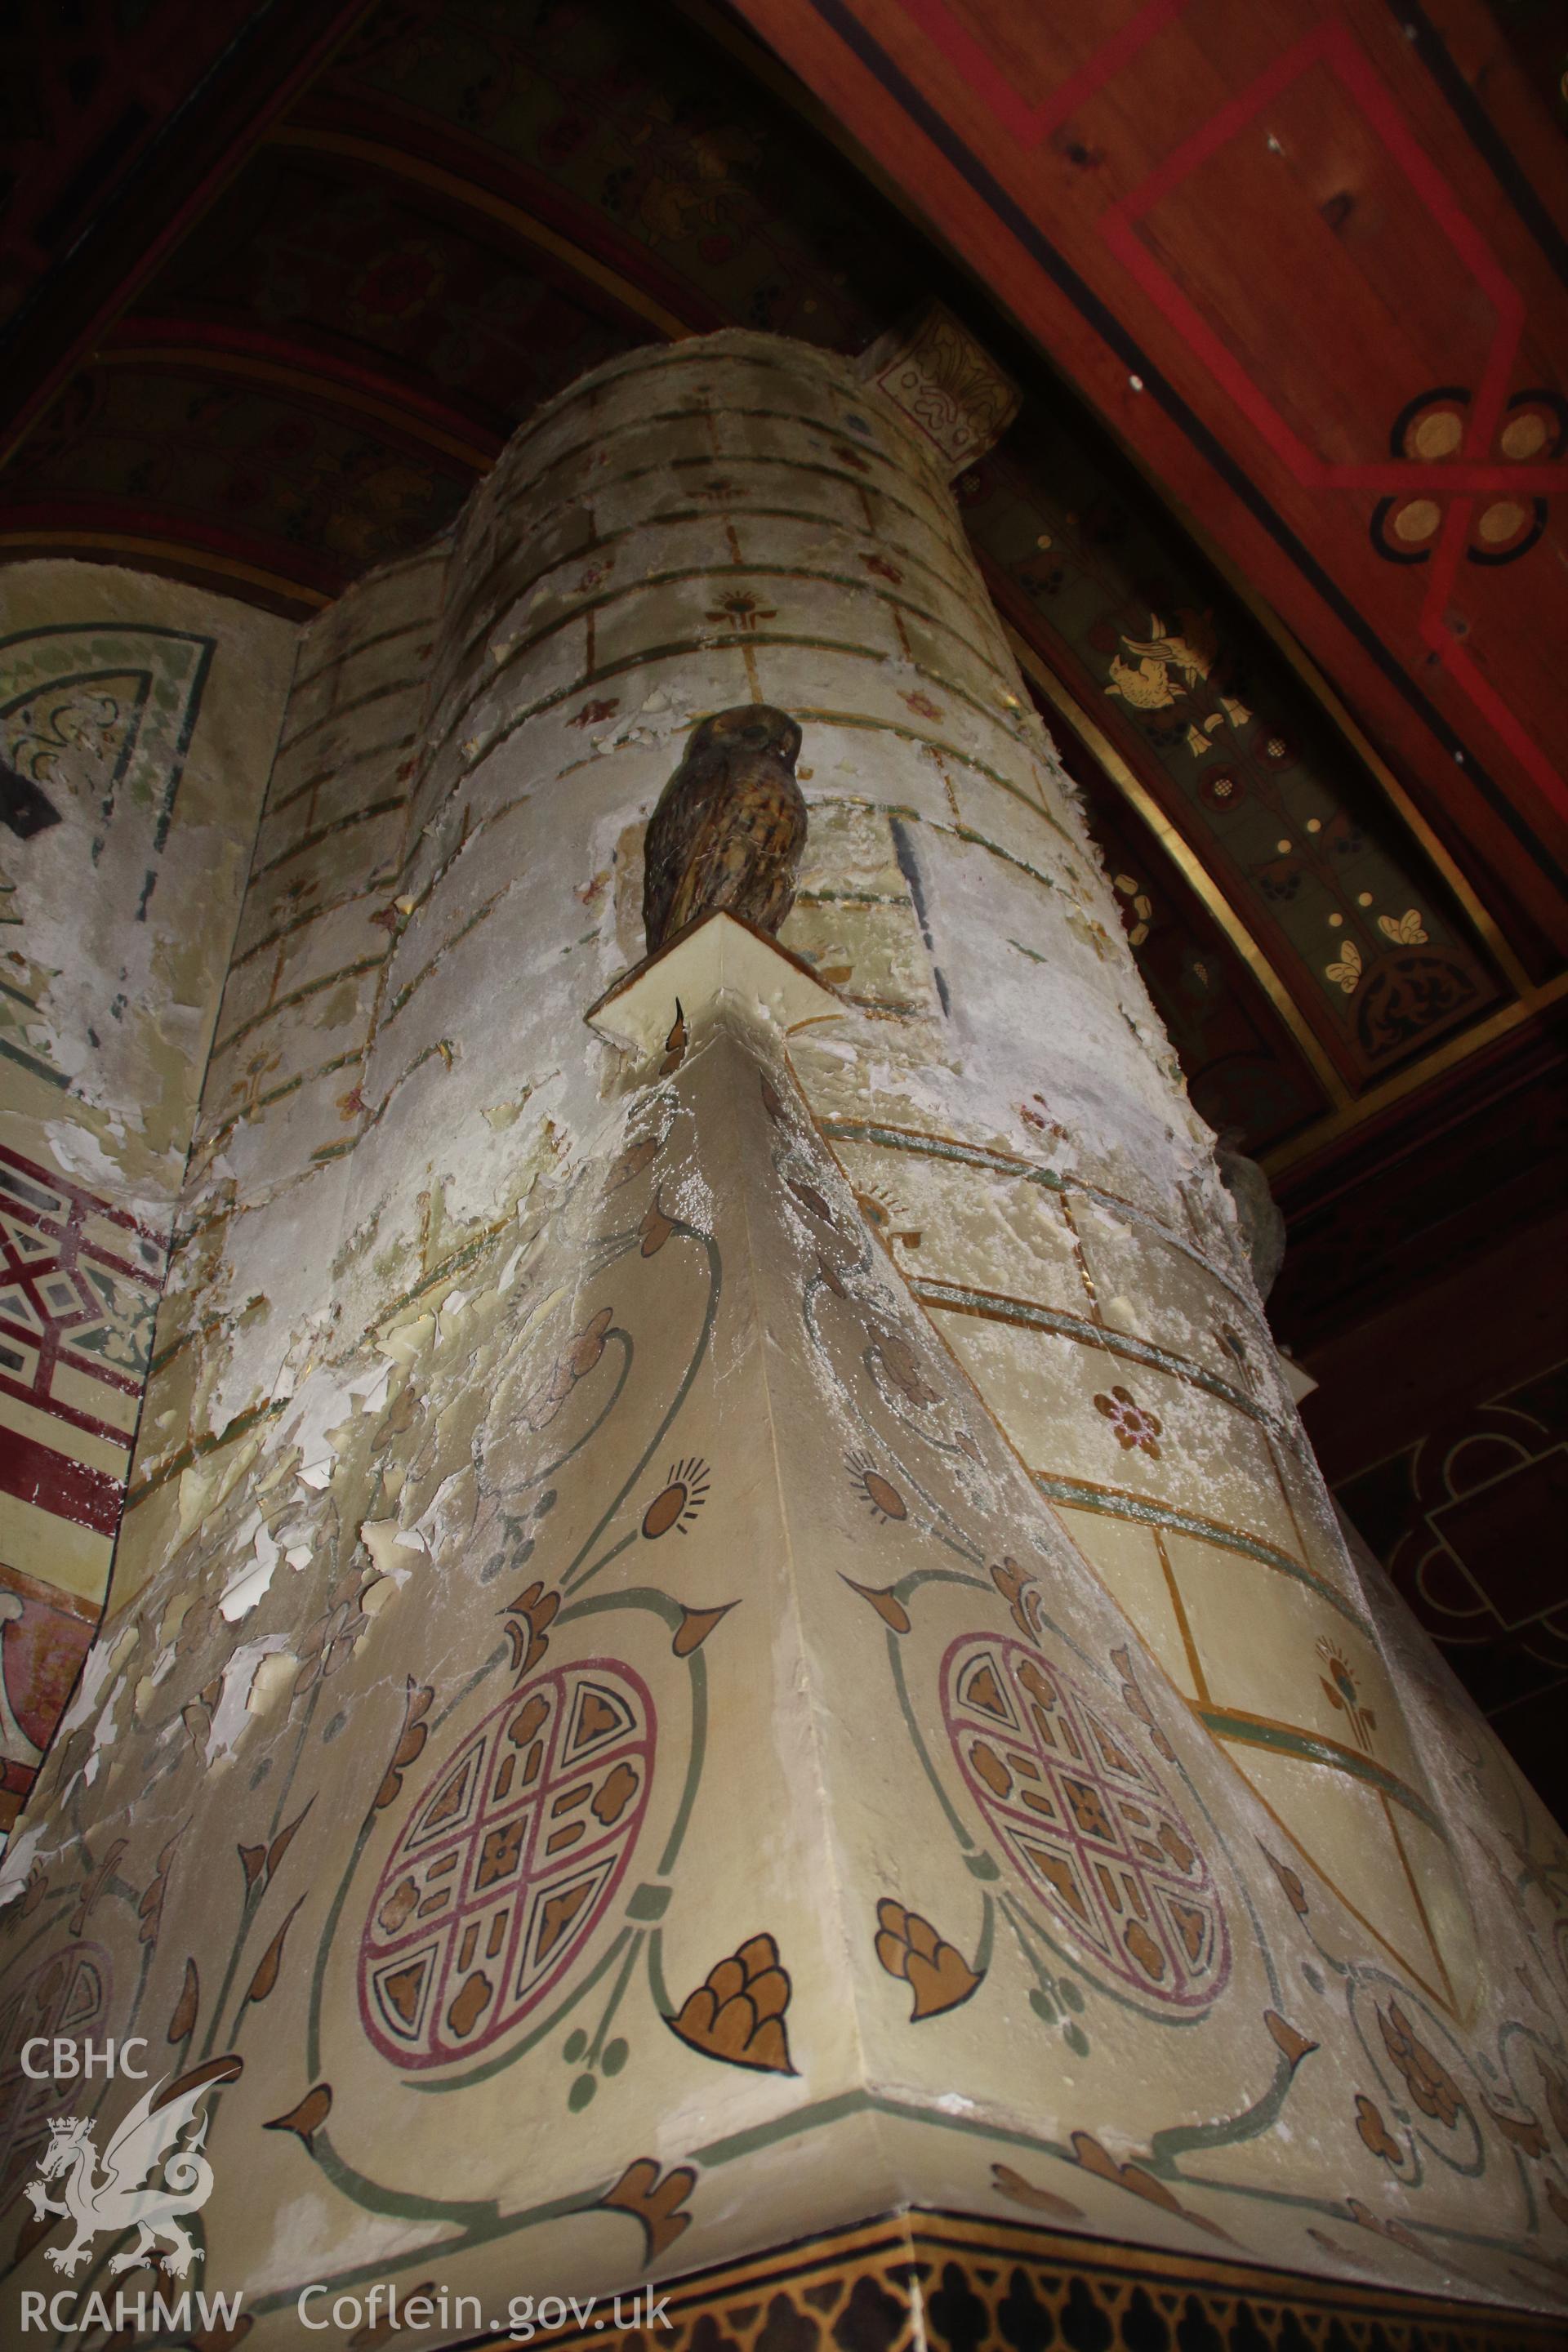 Highly decorative wall in Lady Bute's bedroom at Castell Coch, 1st April 2019. From "Castell Coch, Tongwynlais. Archaeological Building Investigation & Recording & Watching Brief" by Richard Scott Jones, Heritage Recording Services Wales. Report No 202.